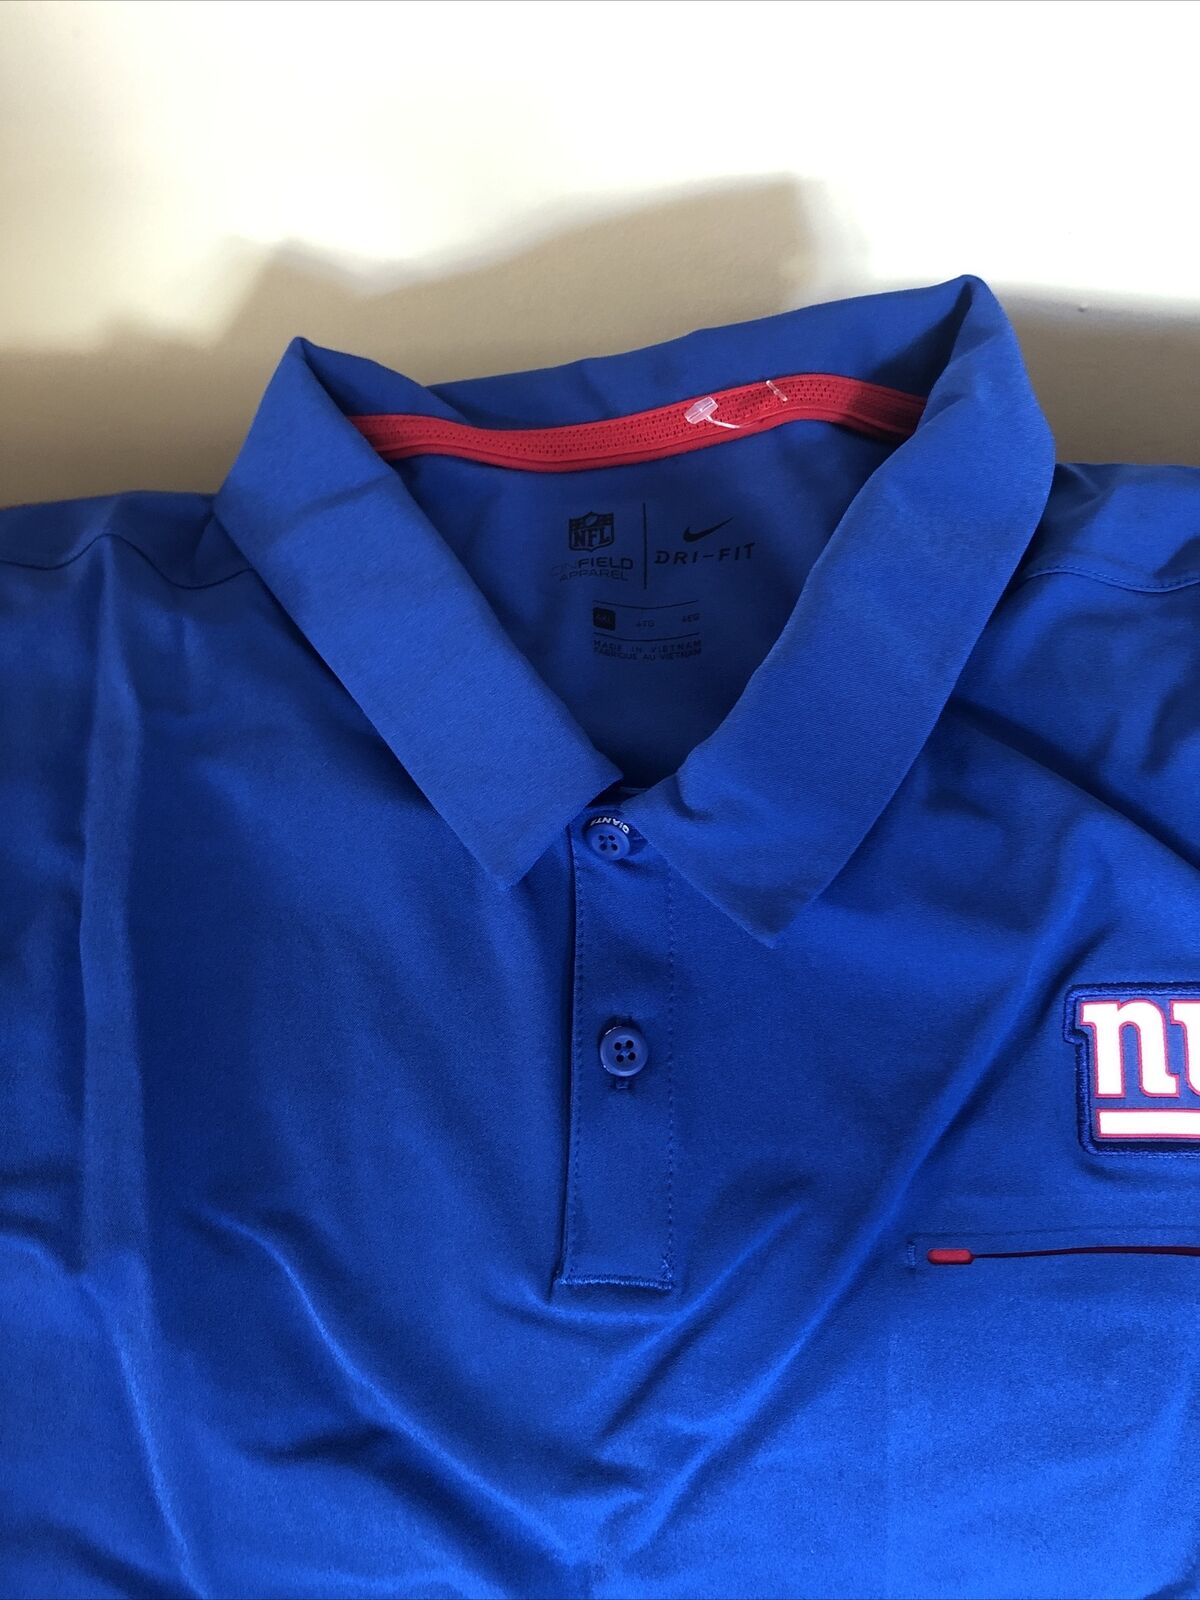 nike New York Giants Blue football polo shirt new with tags size 4XL ...